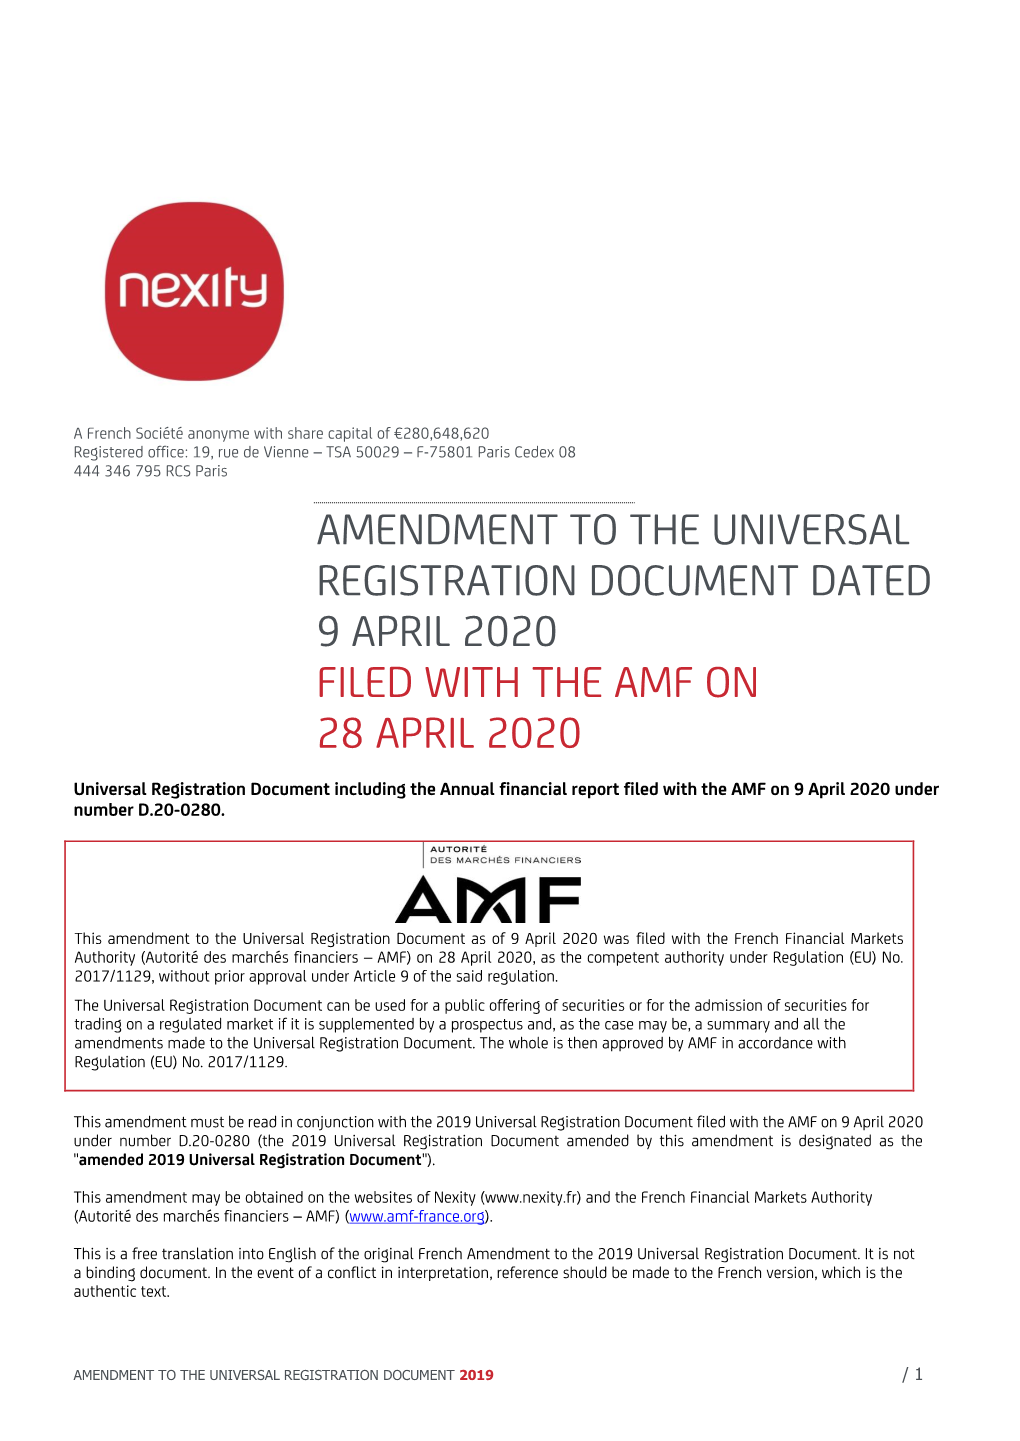 Amendment to the Universal Registration Document Dated 9 April 2020 Filed with the Amf on 28 April 2020